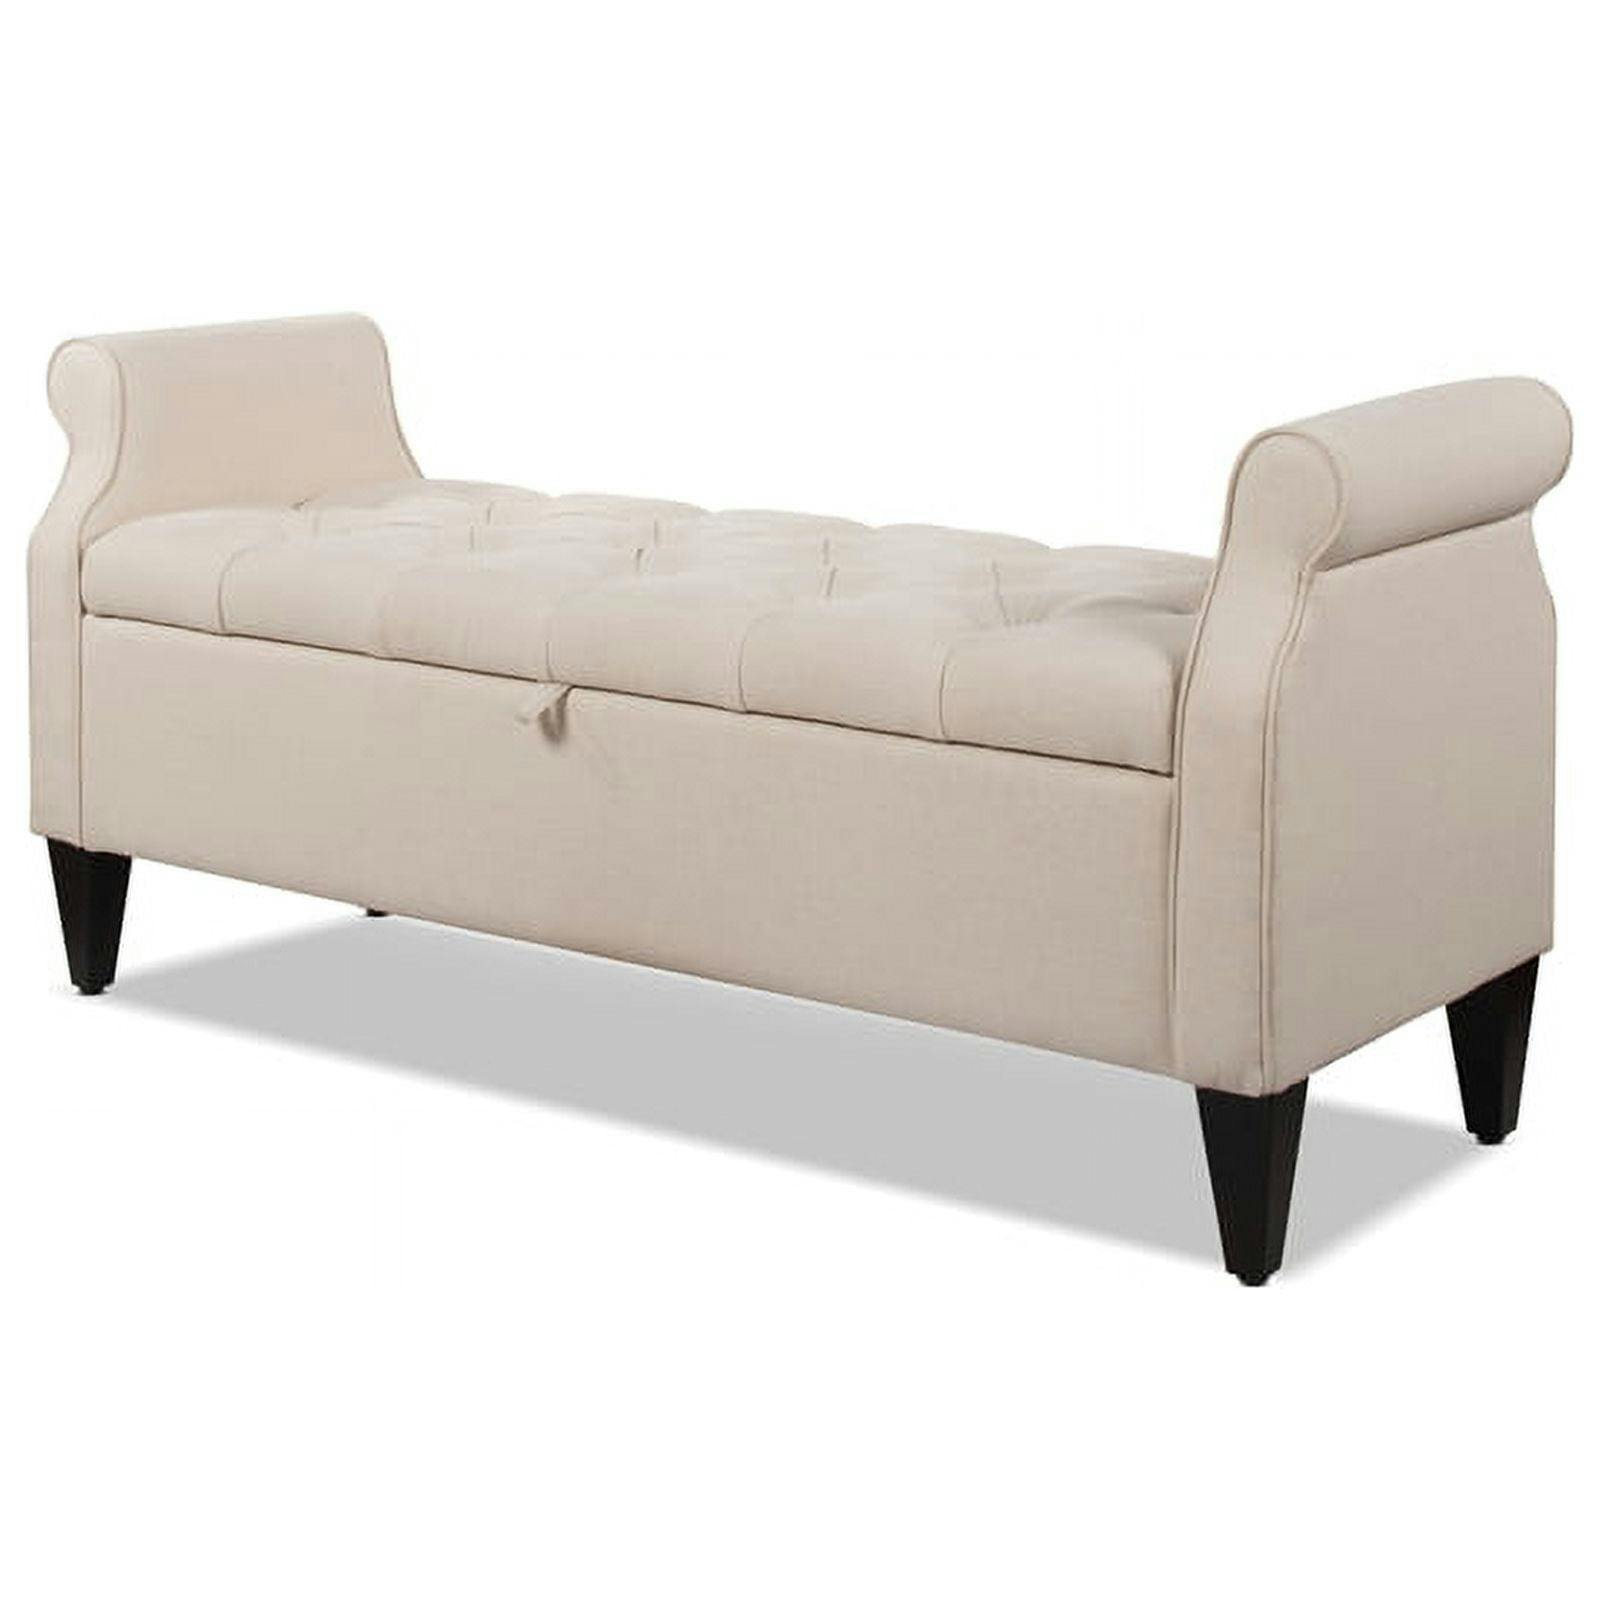 Jacqueline Sky Neutral Tufted Roll Arm Storage Bench